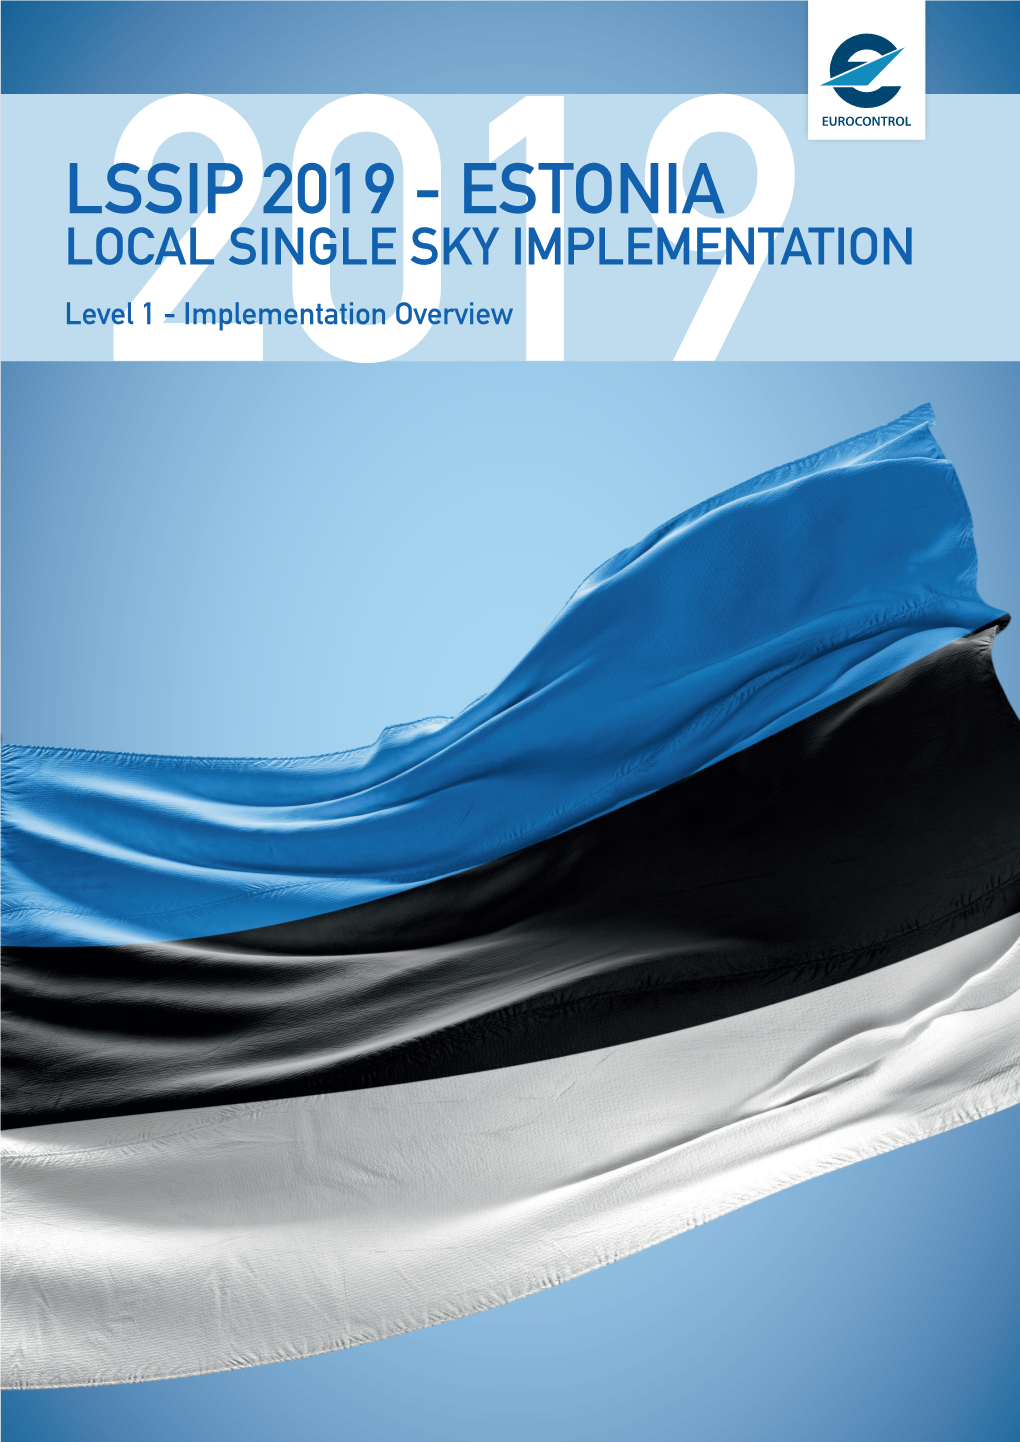 ESTONIA LOCAL SINGLE SKY IMPLEMENTATION Level2019 1 - Implementation Overview